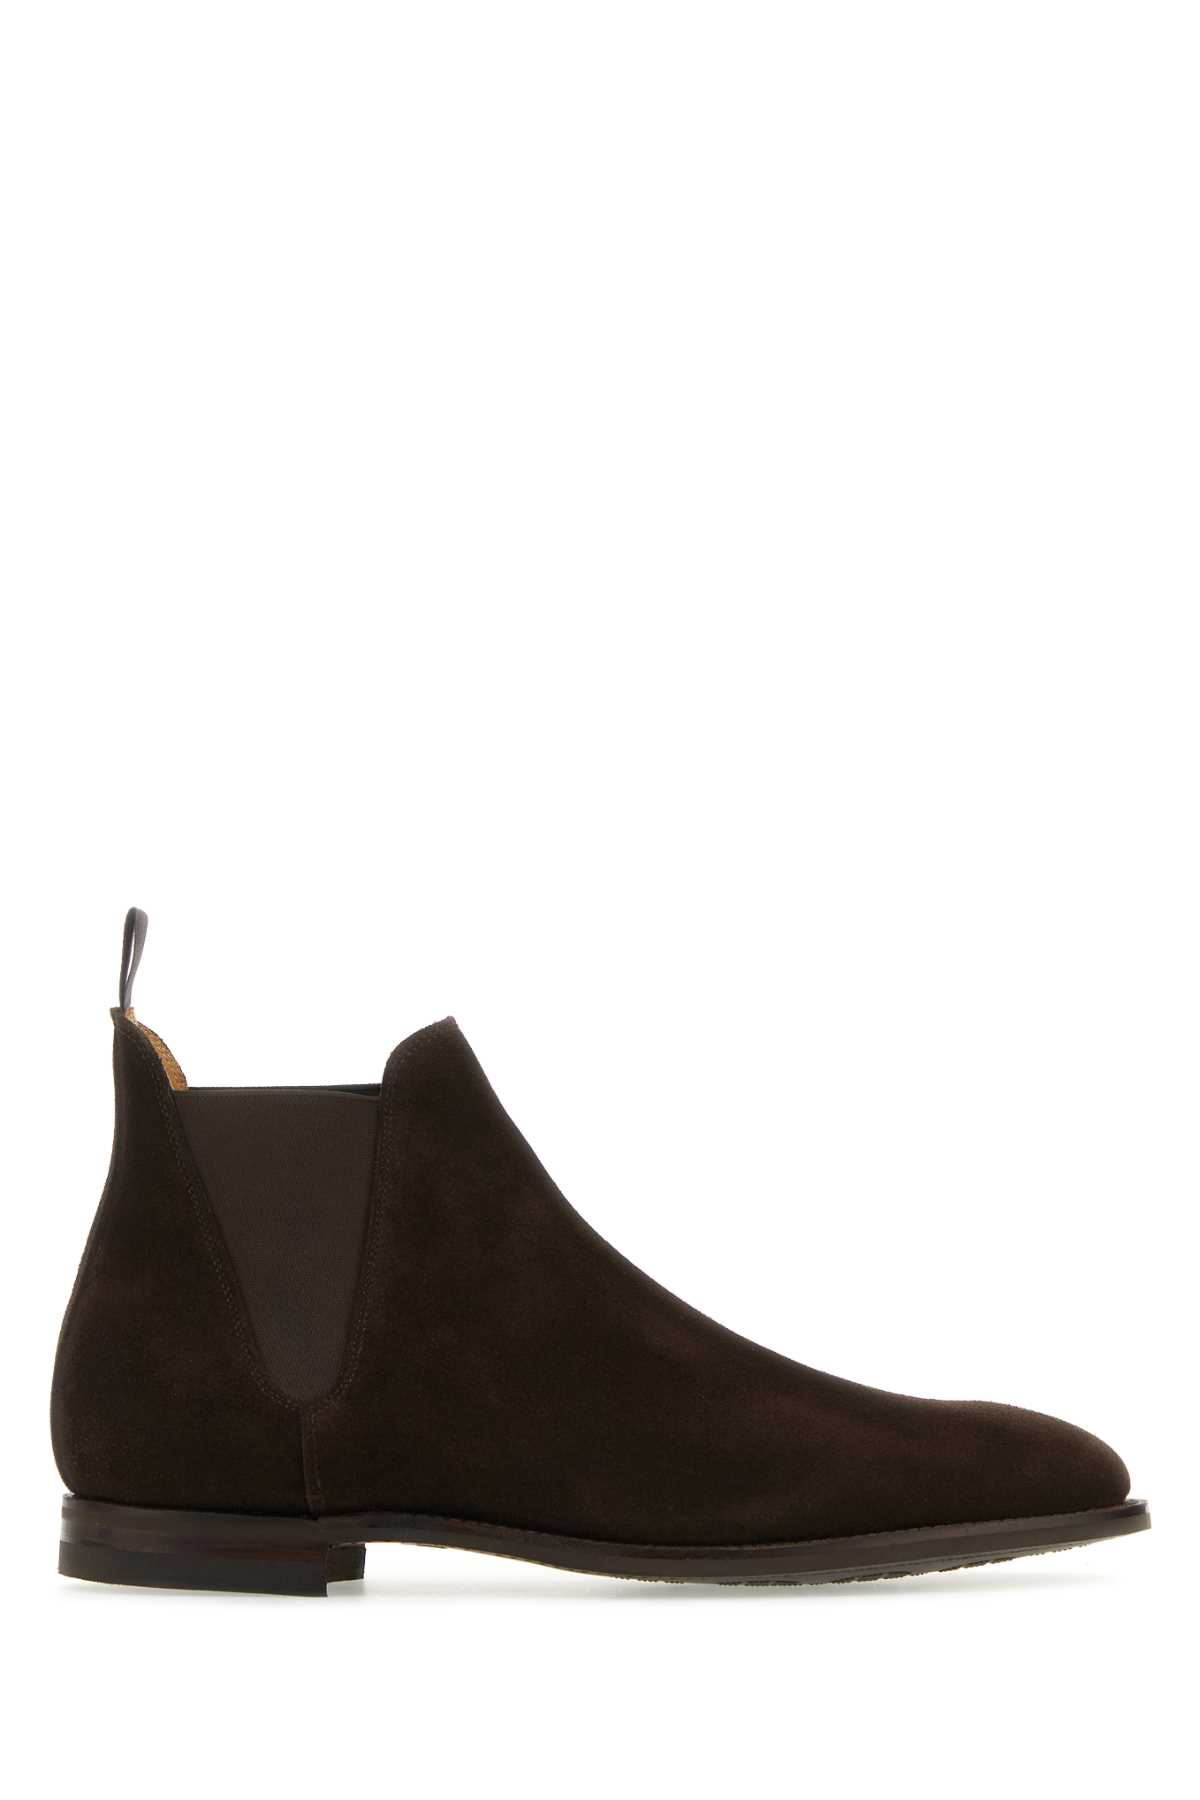 Brown Suede Chelsea 8 Ankle Boots